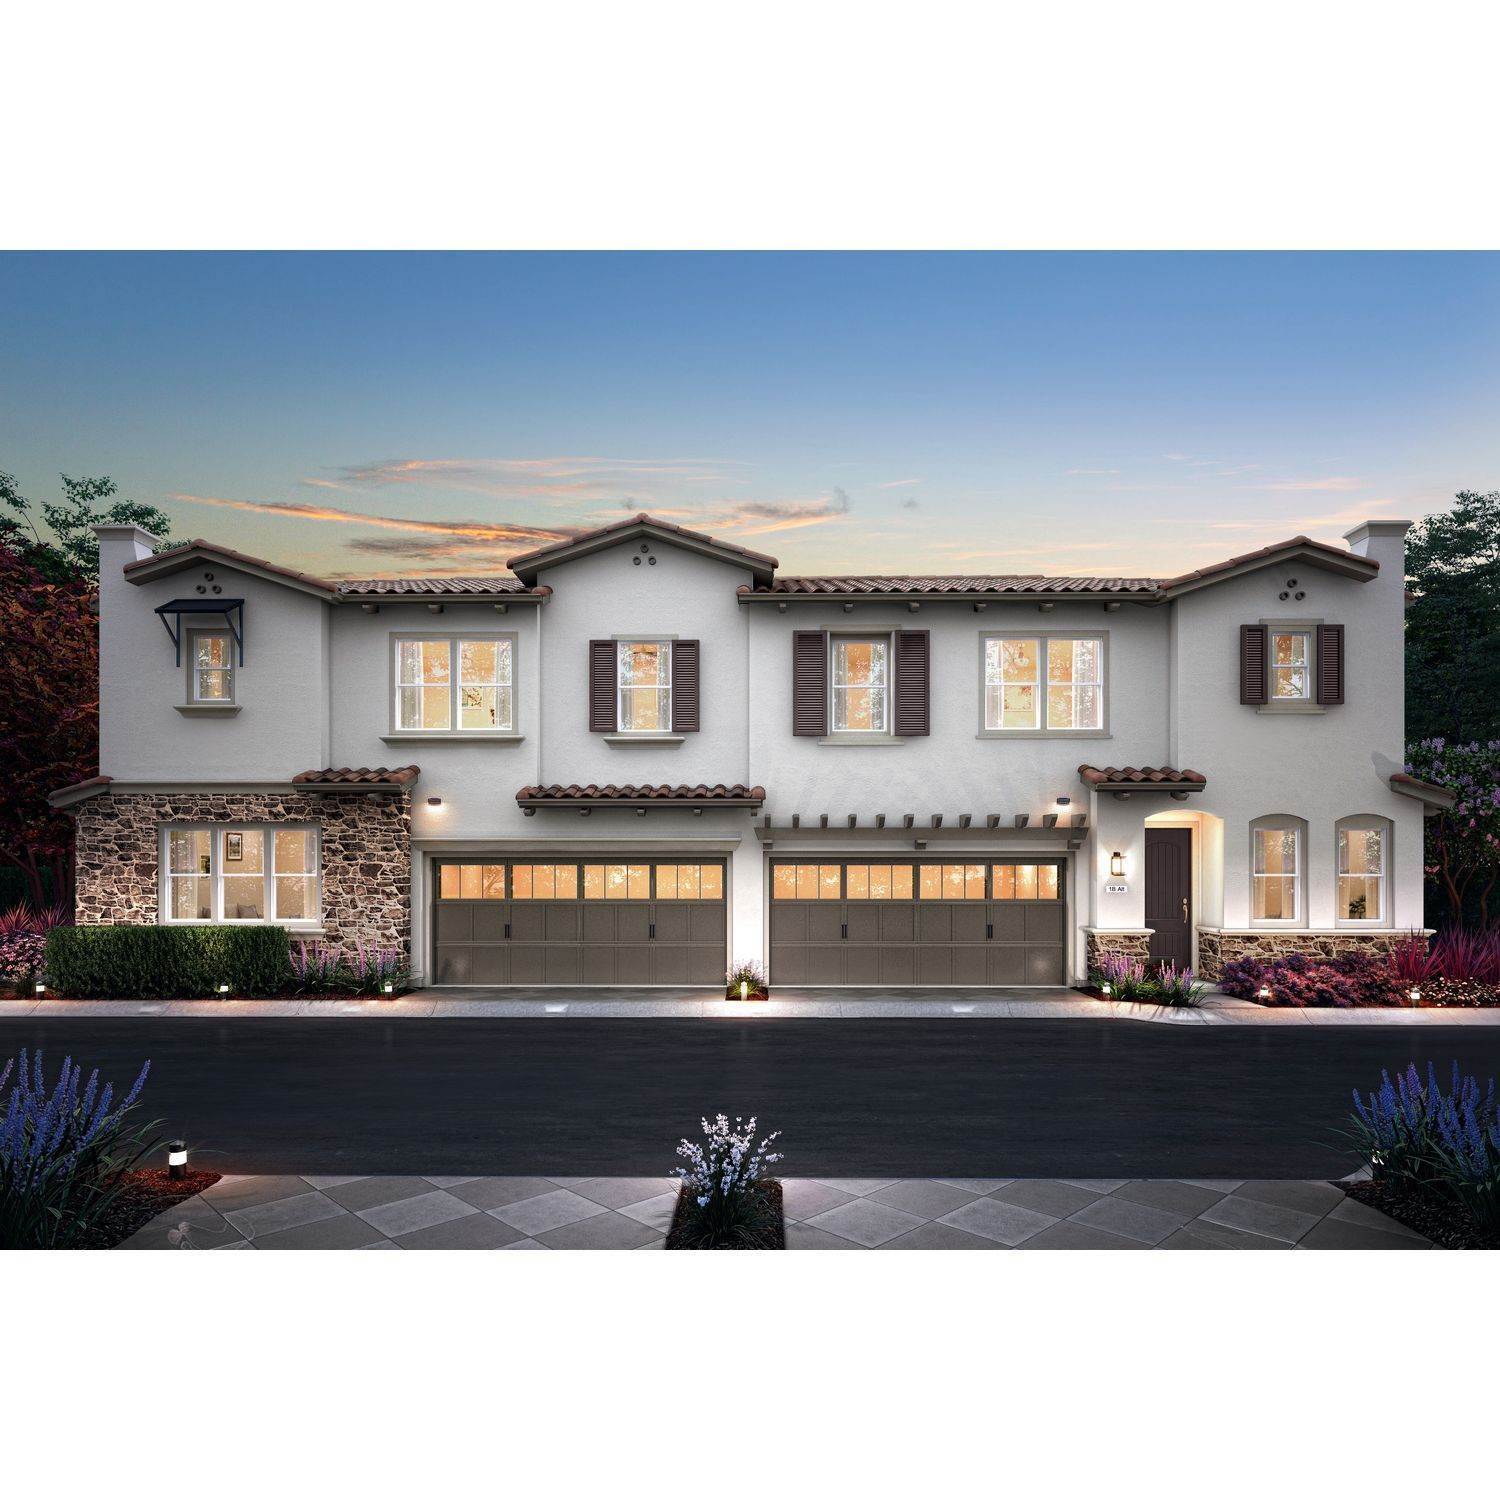 Single Family for Active at Aventura On Mission - Plan 1 38569 Mission Blvd FREMONT, CALIFORNIA 94536 UNITED STATES